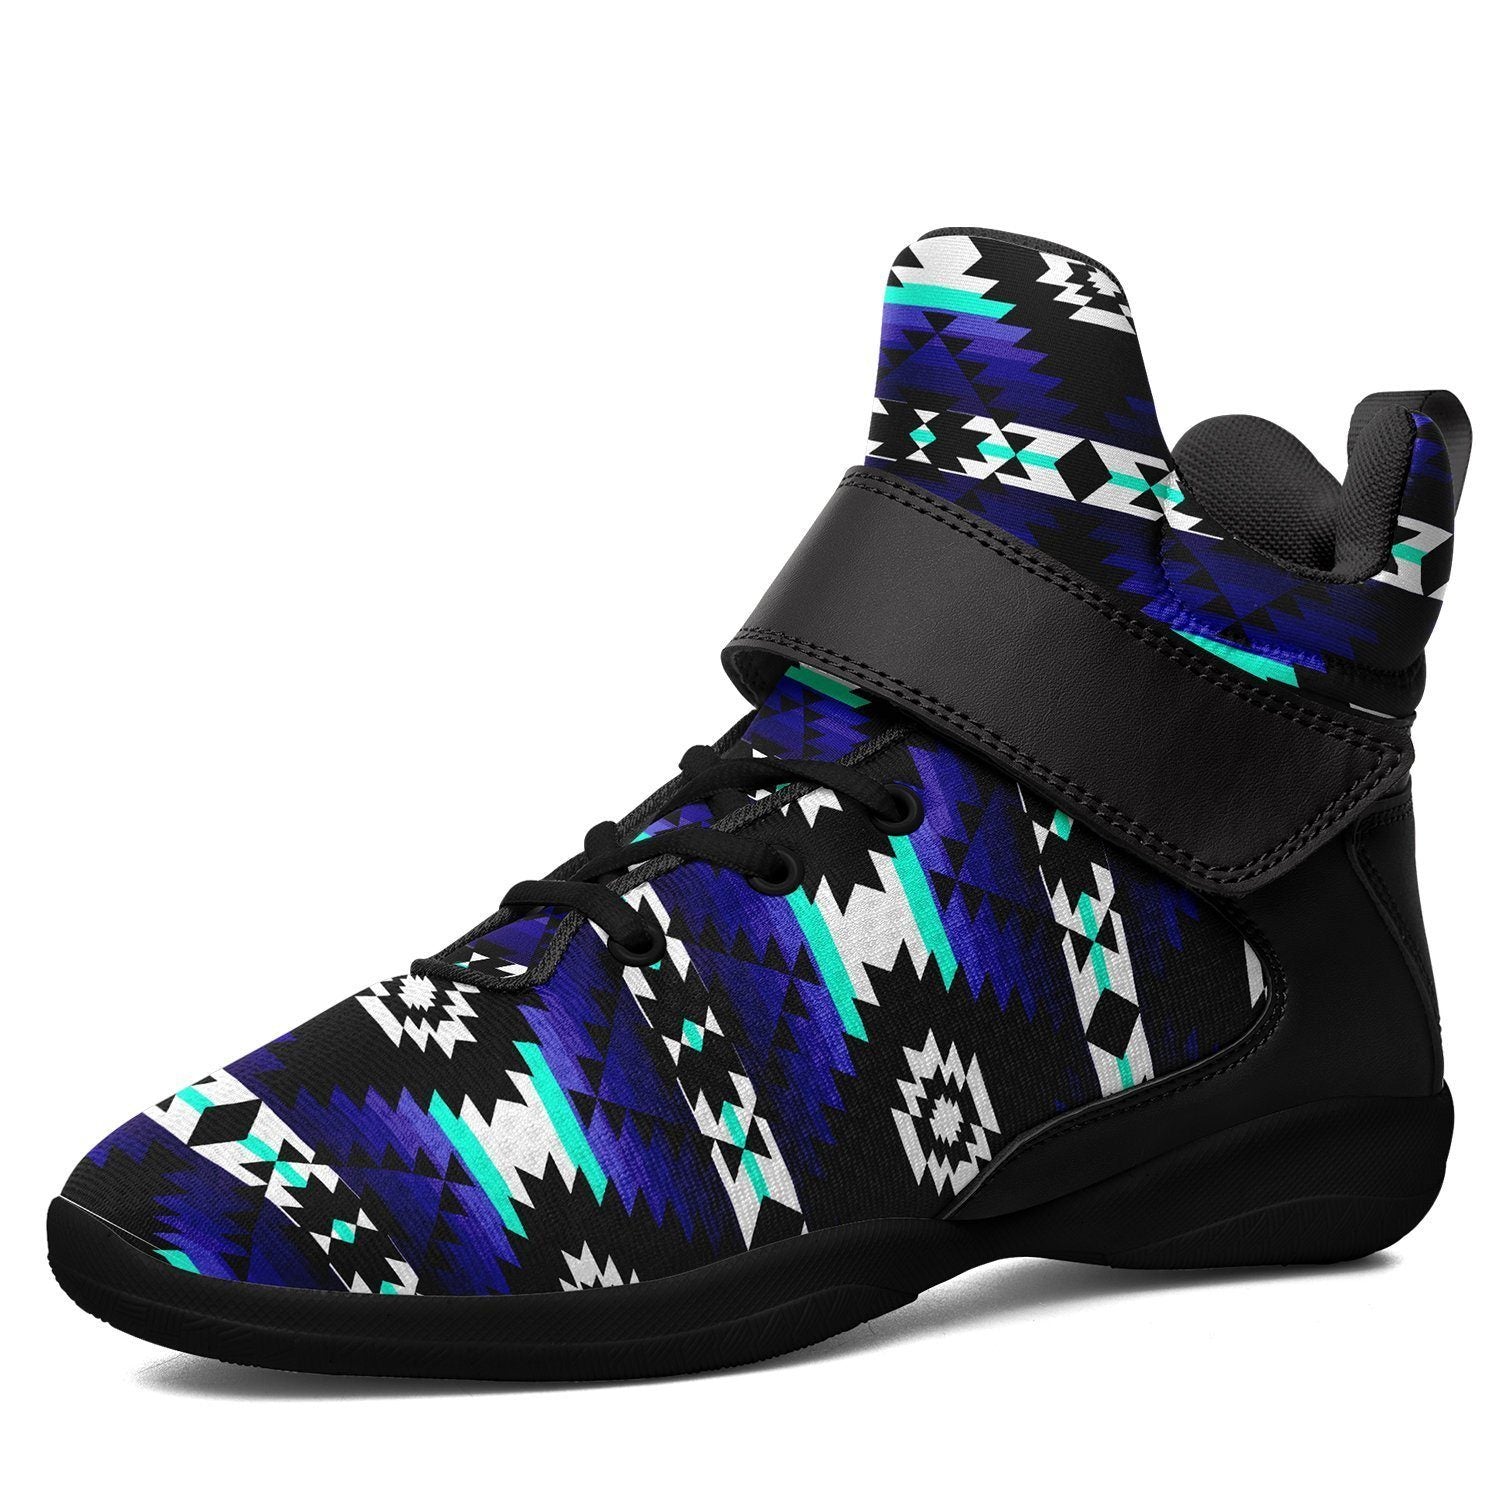 Cree Confederacy Midnight Ipottaa Basketball / Sport High Top Shoes - Black Sole 49 Dzine US Men 7 / EUR 40 Black Sole with Black Strap 